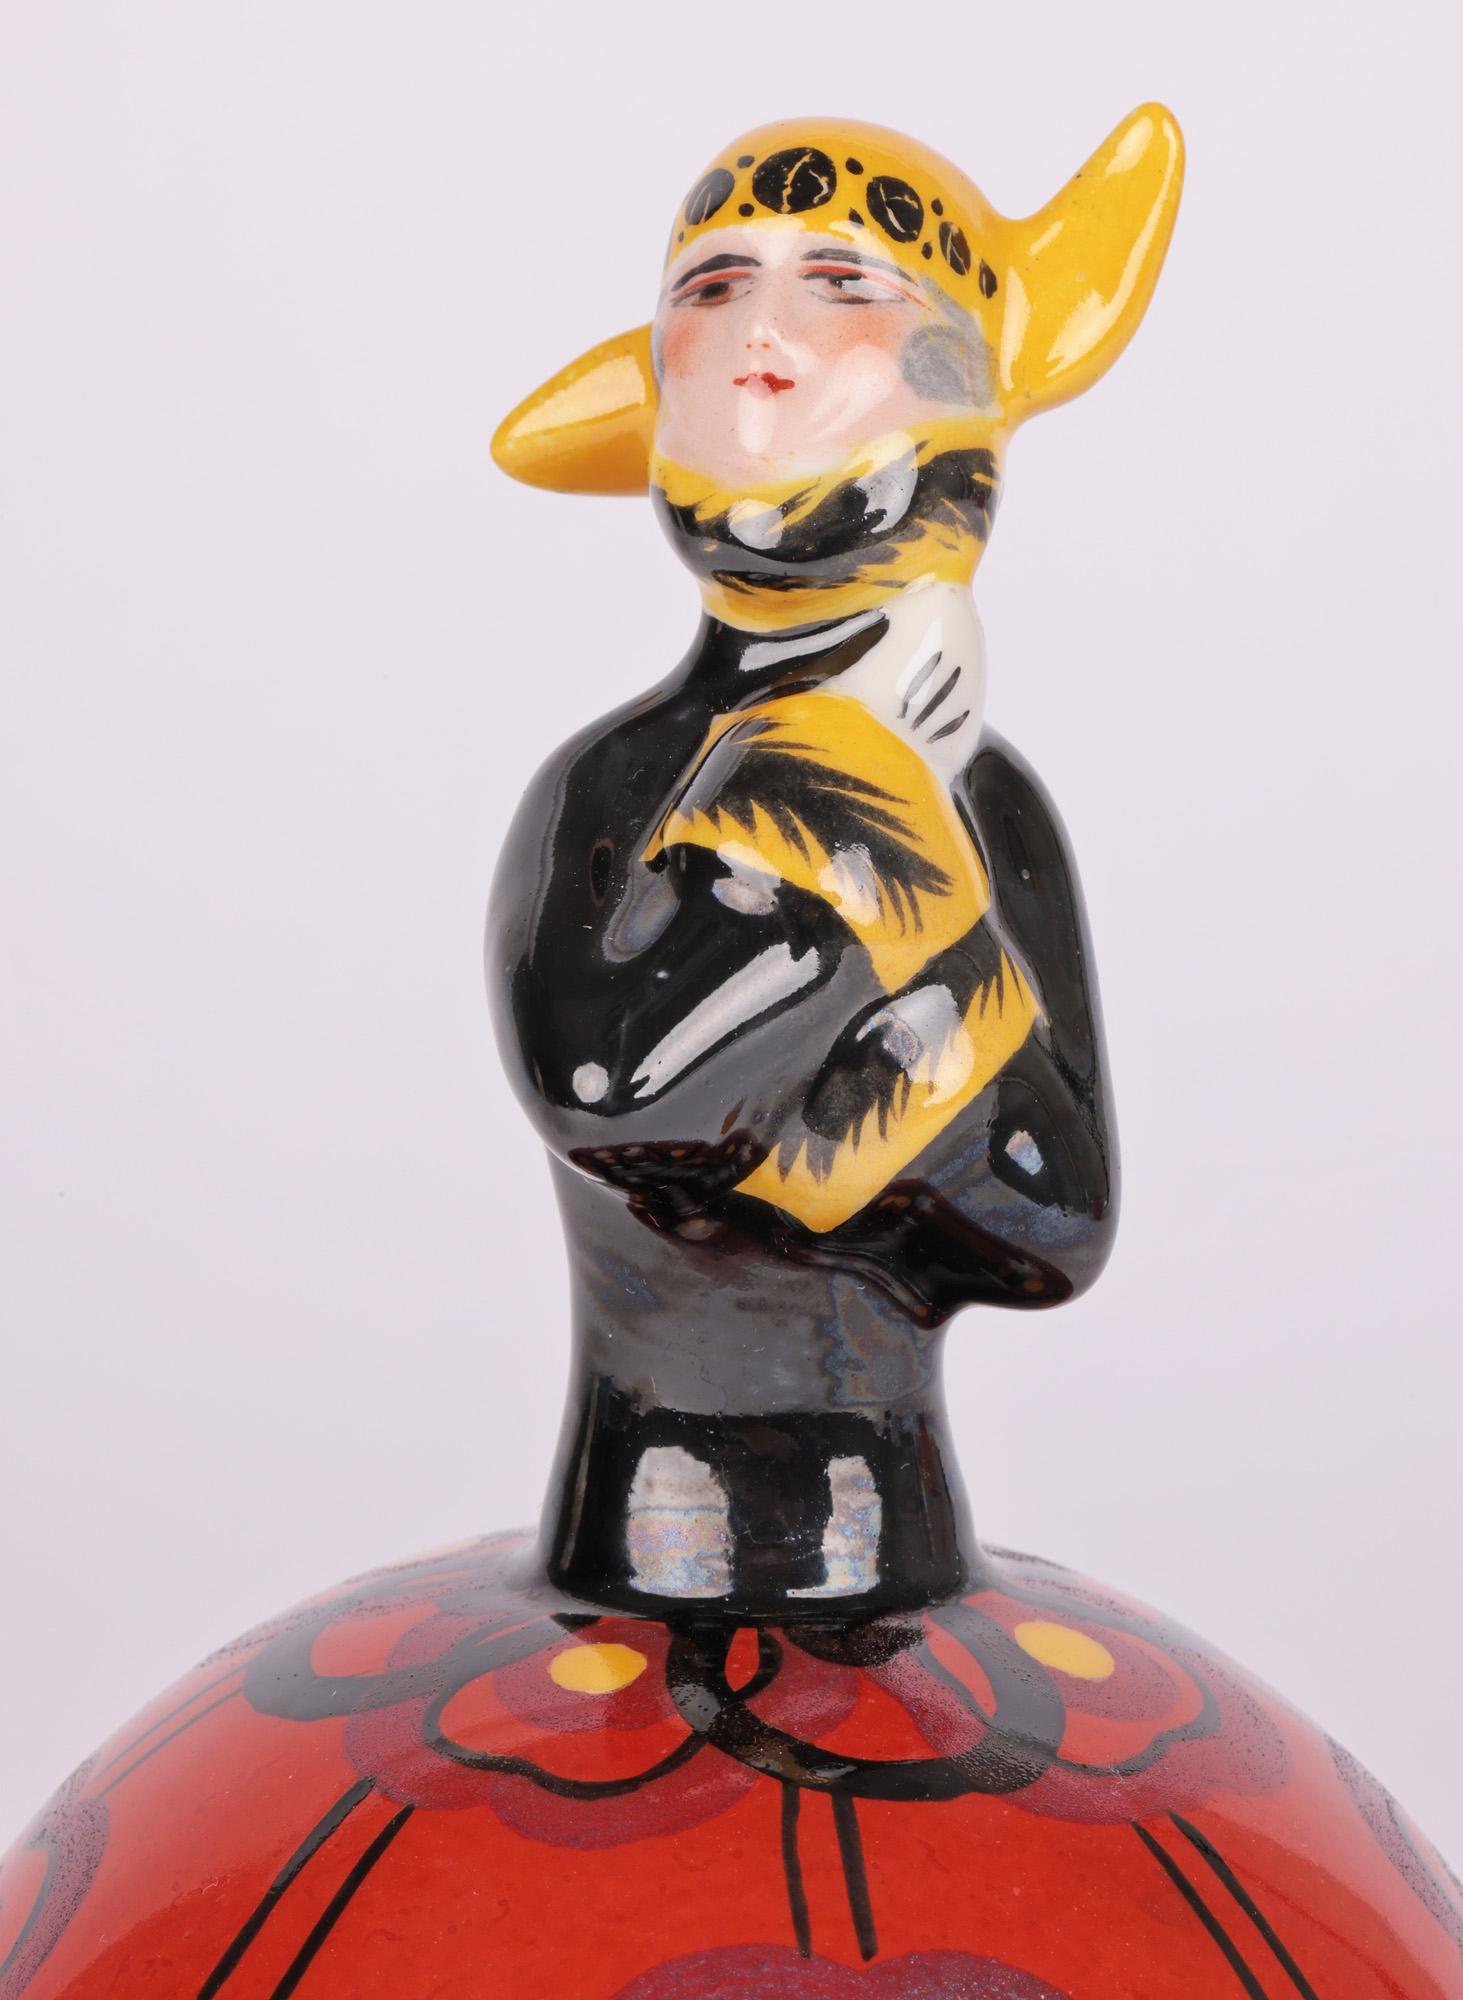 A scarce and finely made French art deco porcelain lidded bonbonnerie formed as a flapper girl dating from around 1930. The bonbonnerie is of round shape standing on an unglazed foot and has a domed cover with the handle to the cover formed as the